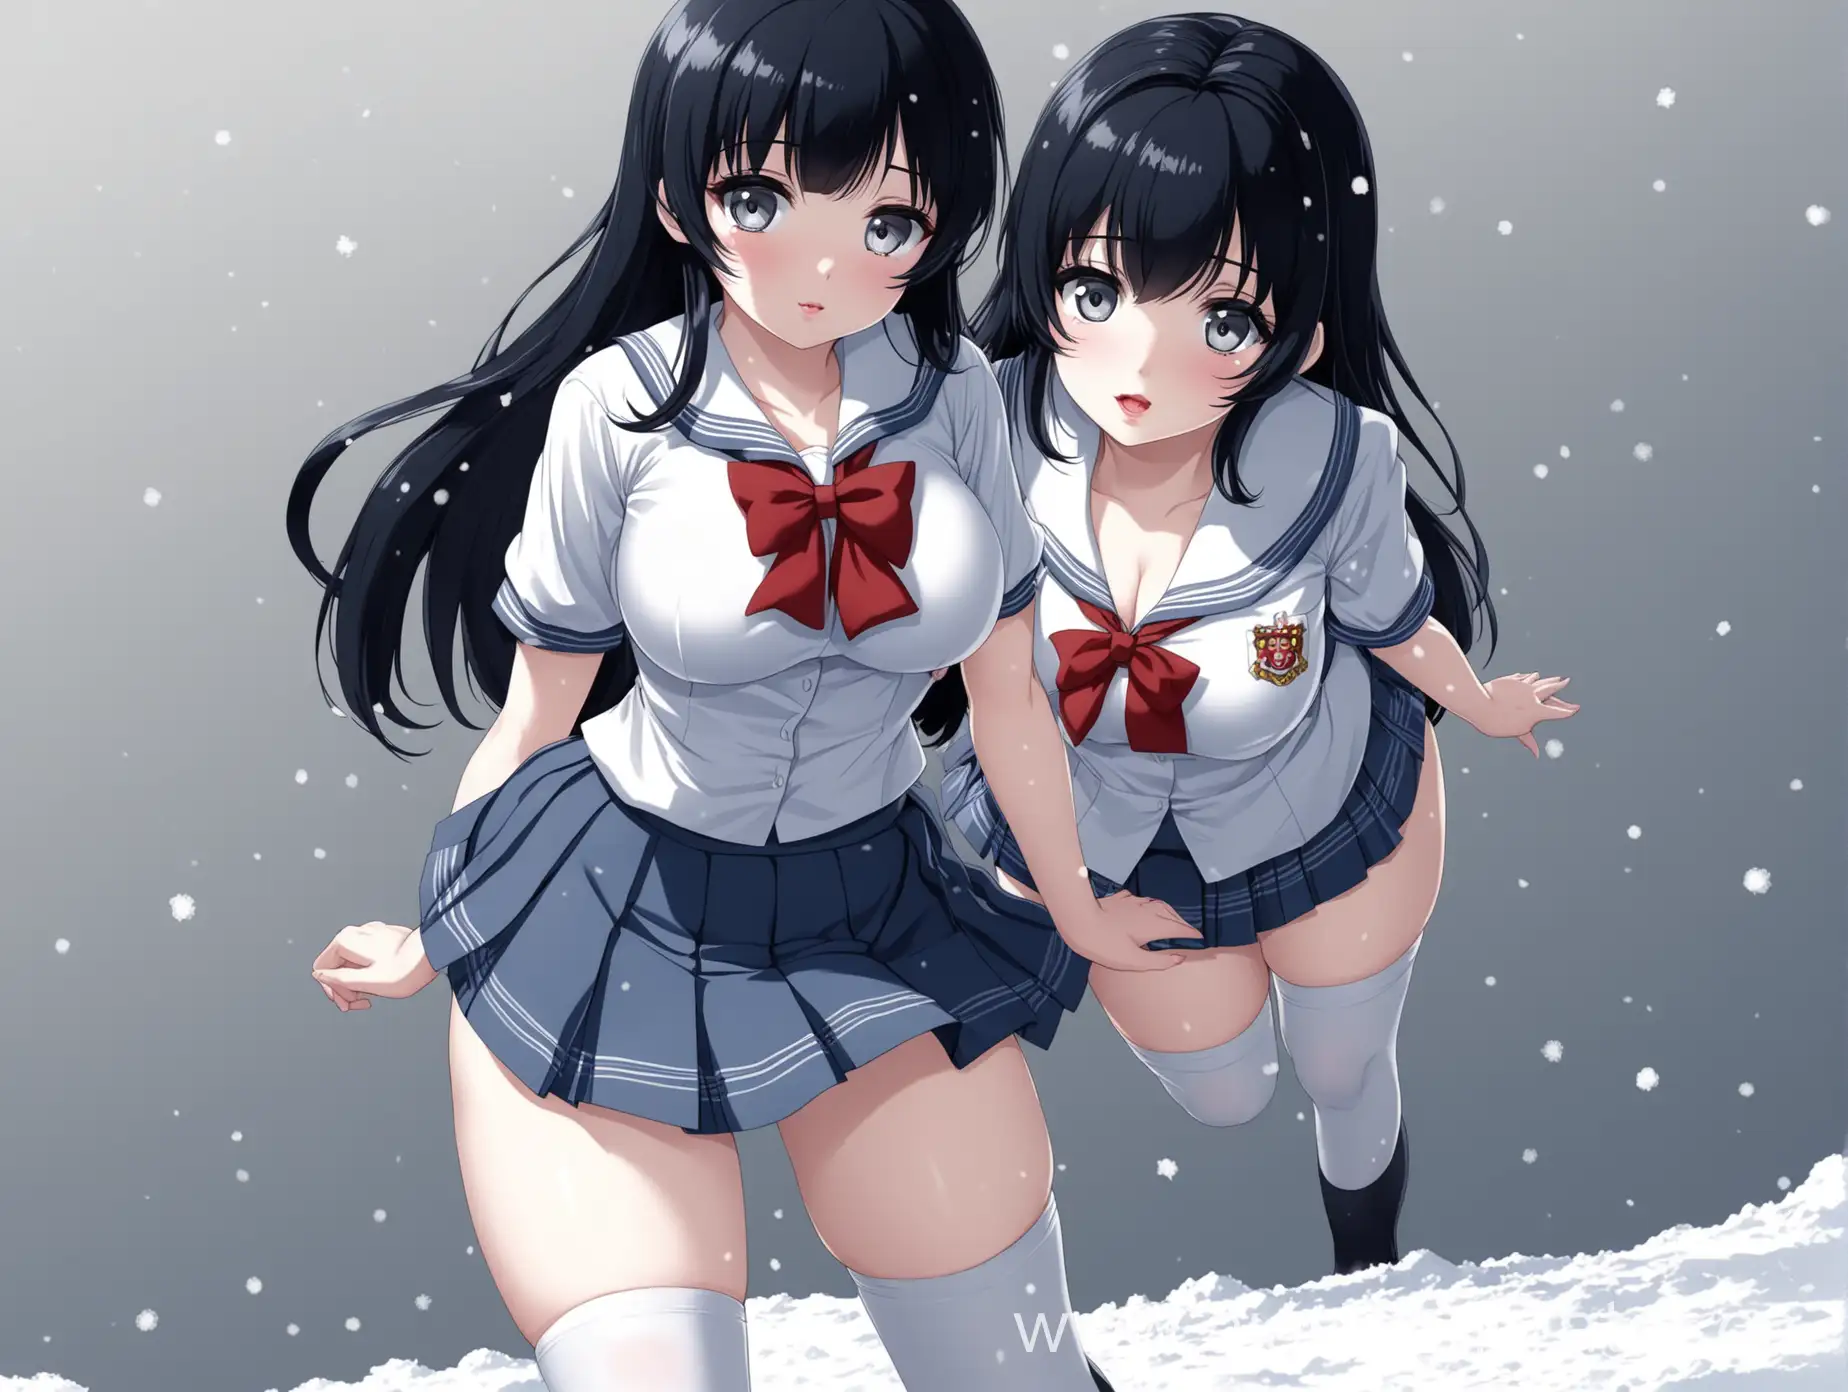 Anime-Girl-with-Black-Hair-and-School-Uniform-Cute-Face-and-Thigh-Highs